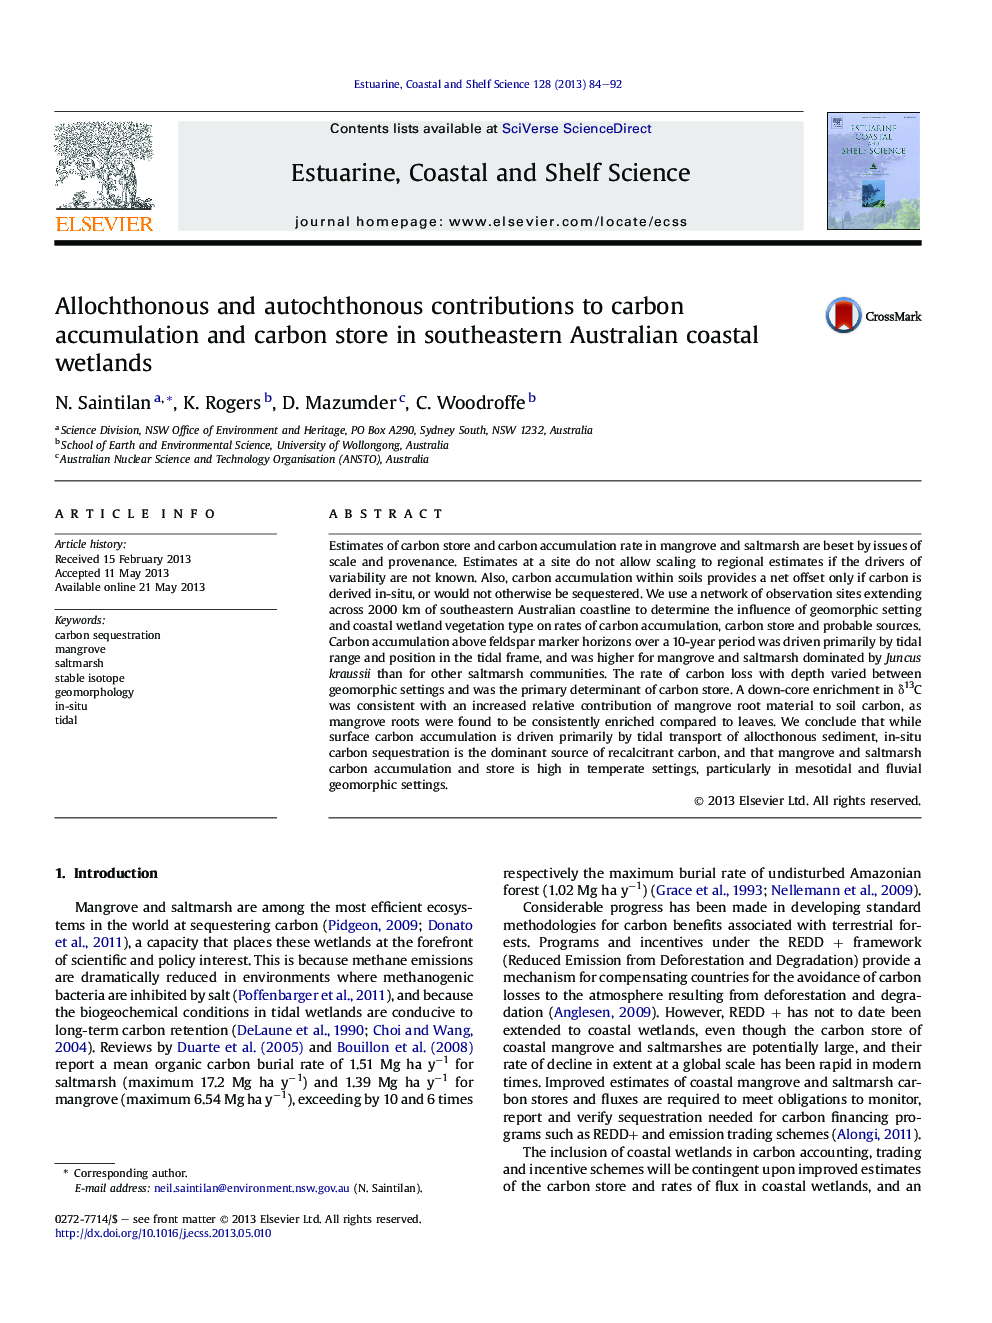 Allochthonous and autochthonous contributions to carbon accumulation and carbon store in southeastern Australian coastal wetlands